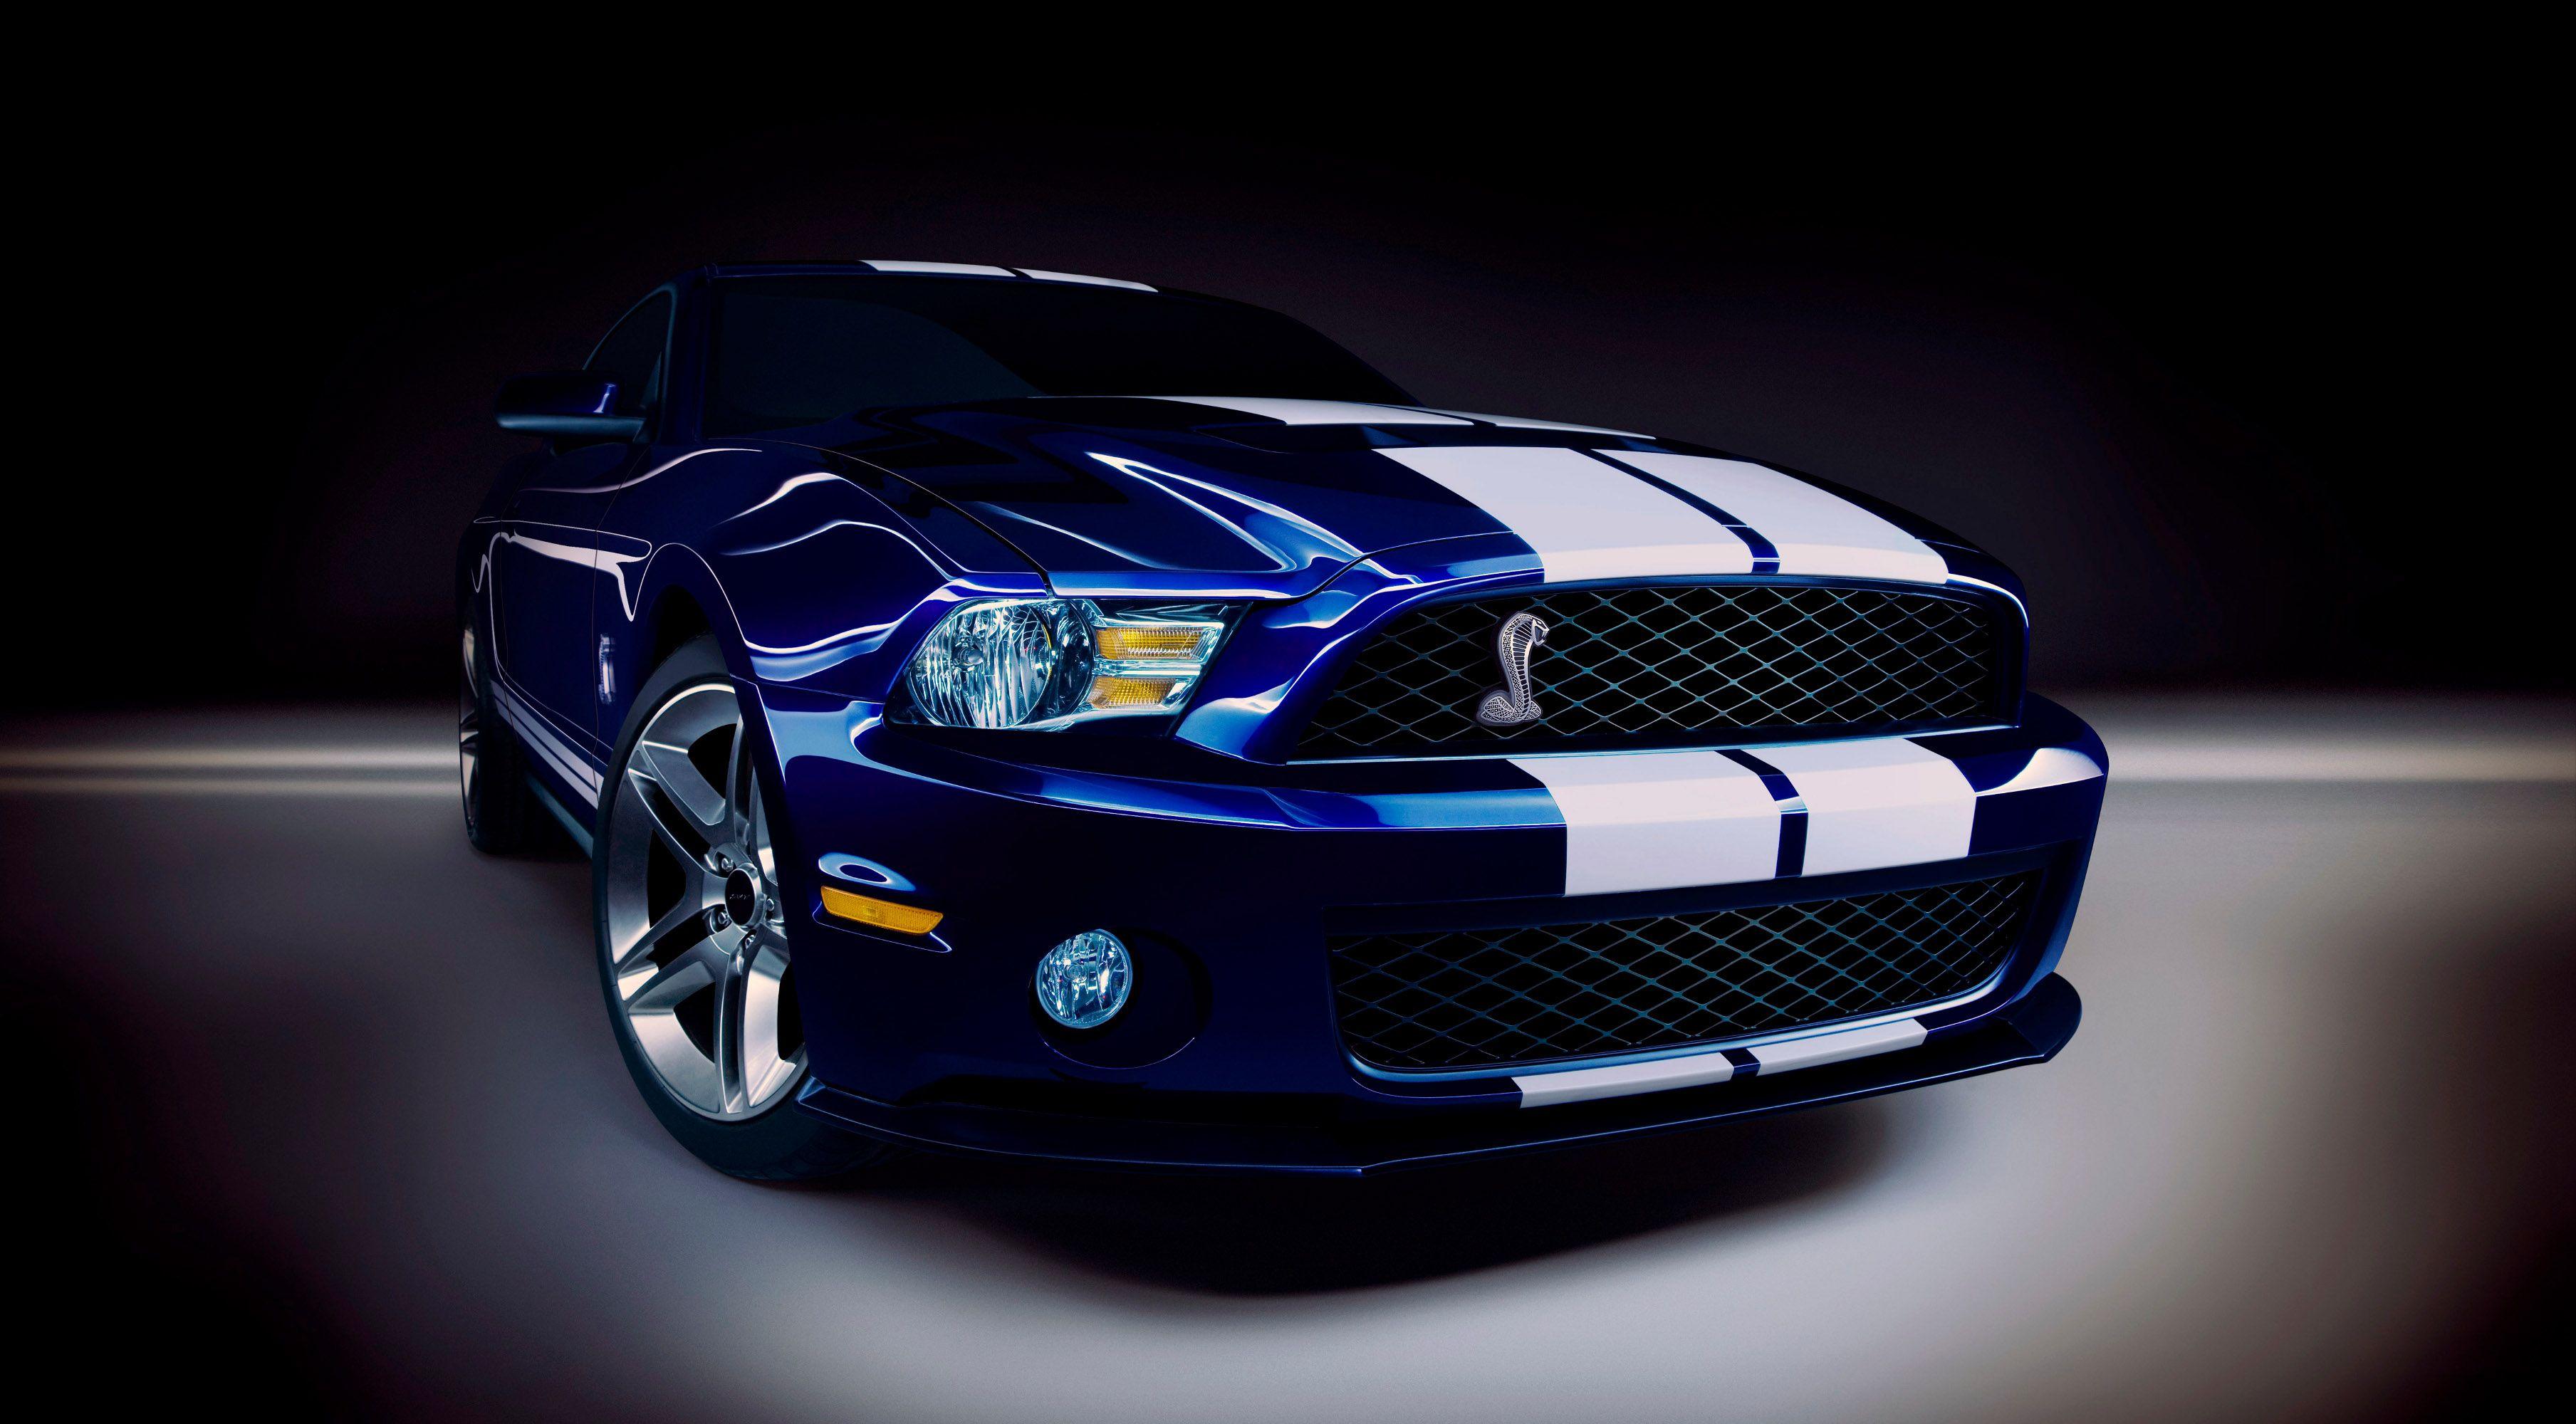 Ford wallpapers hd